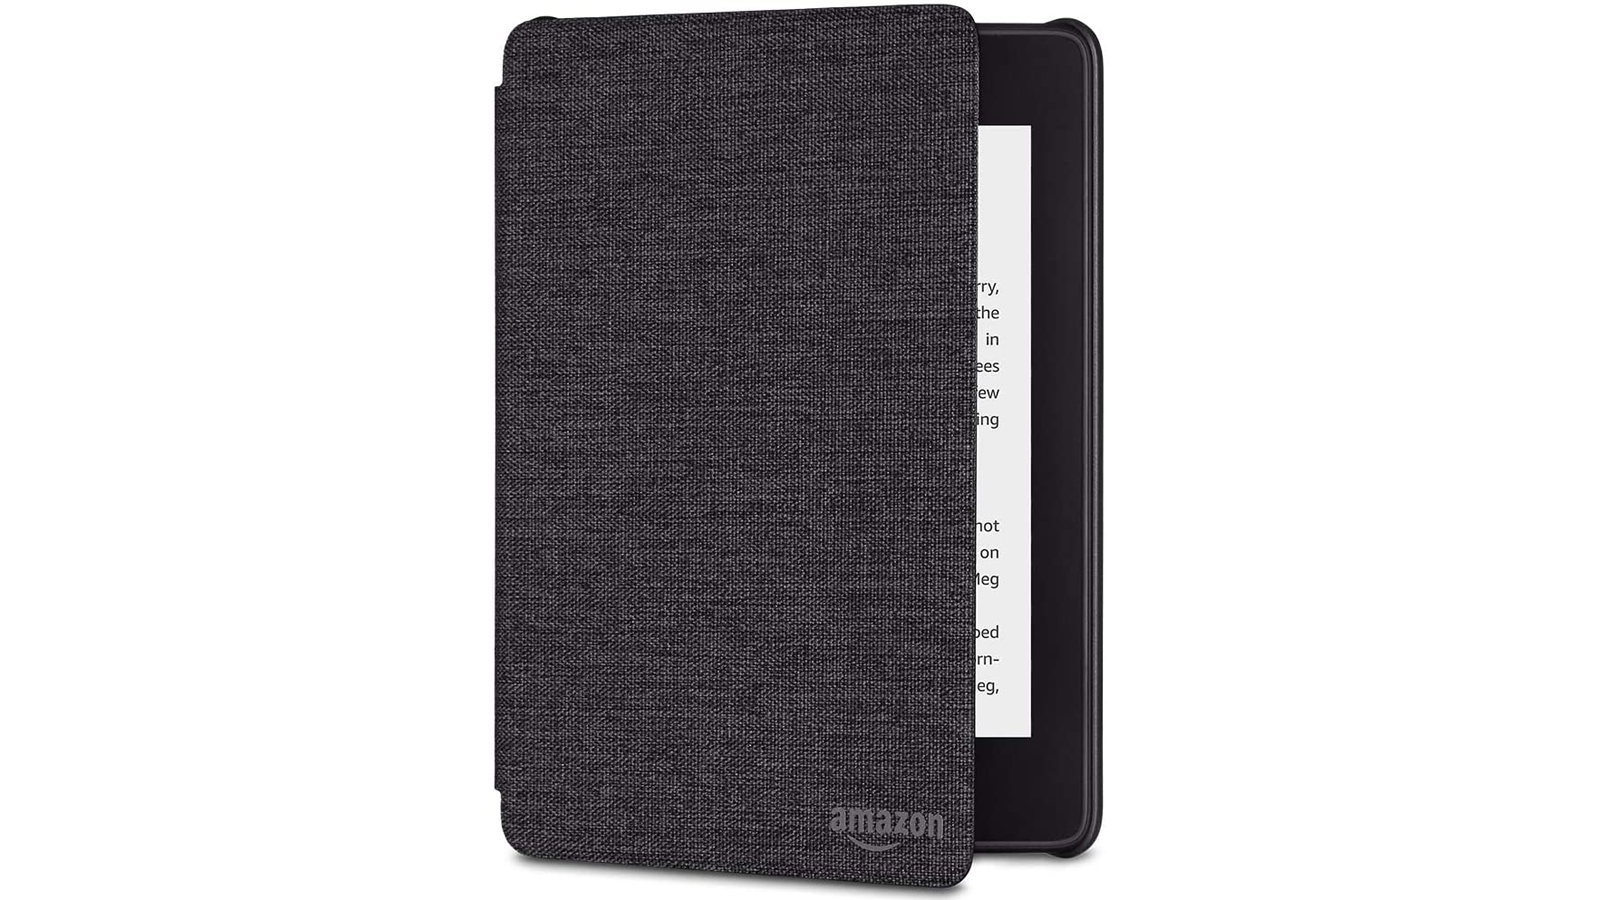 A Kindle Paperwhite with a Cover case.